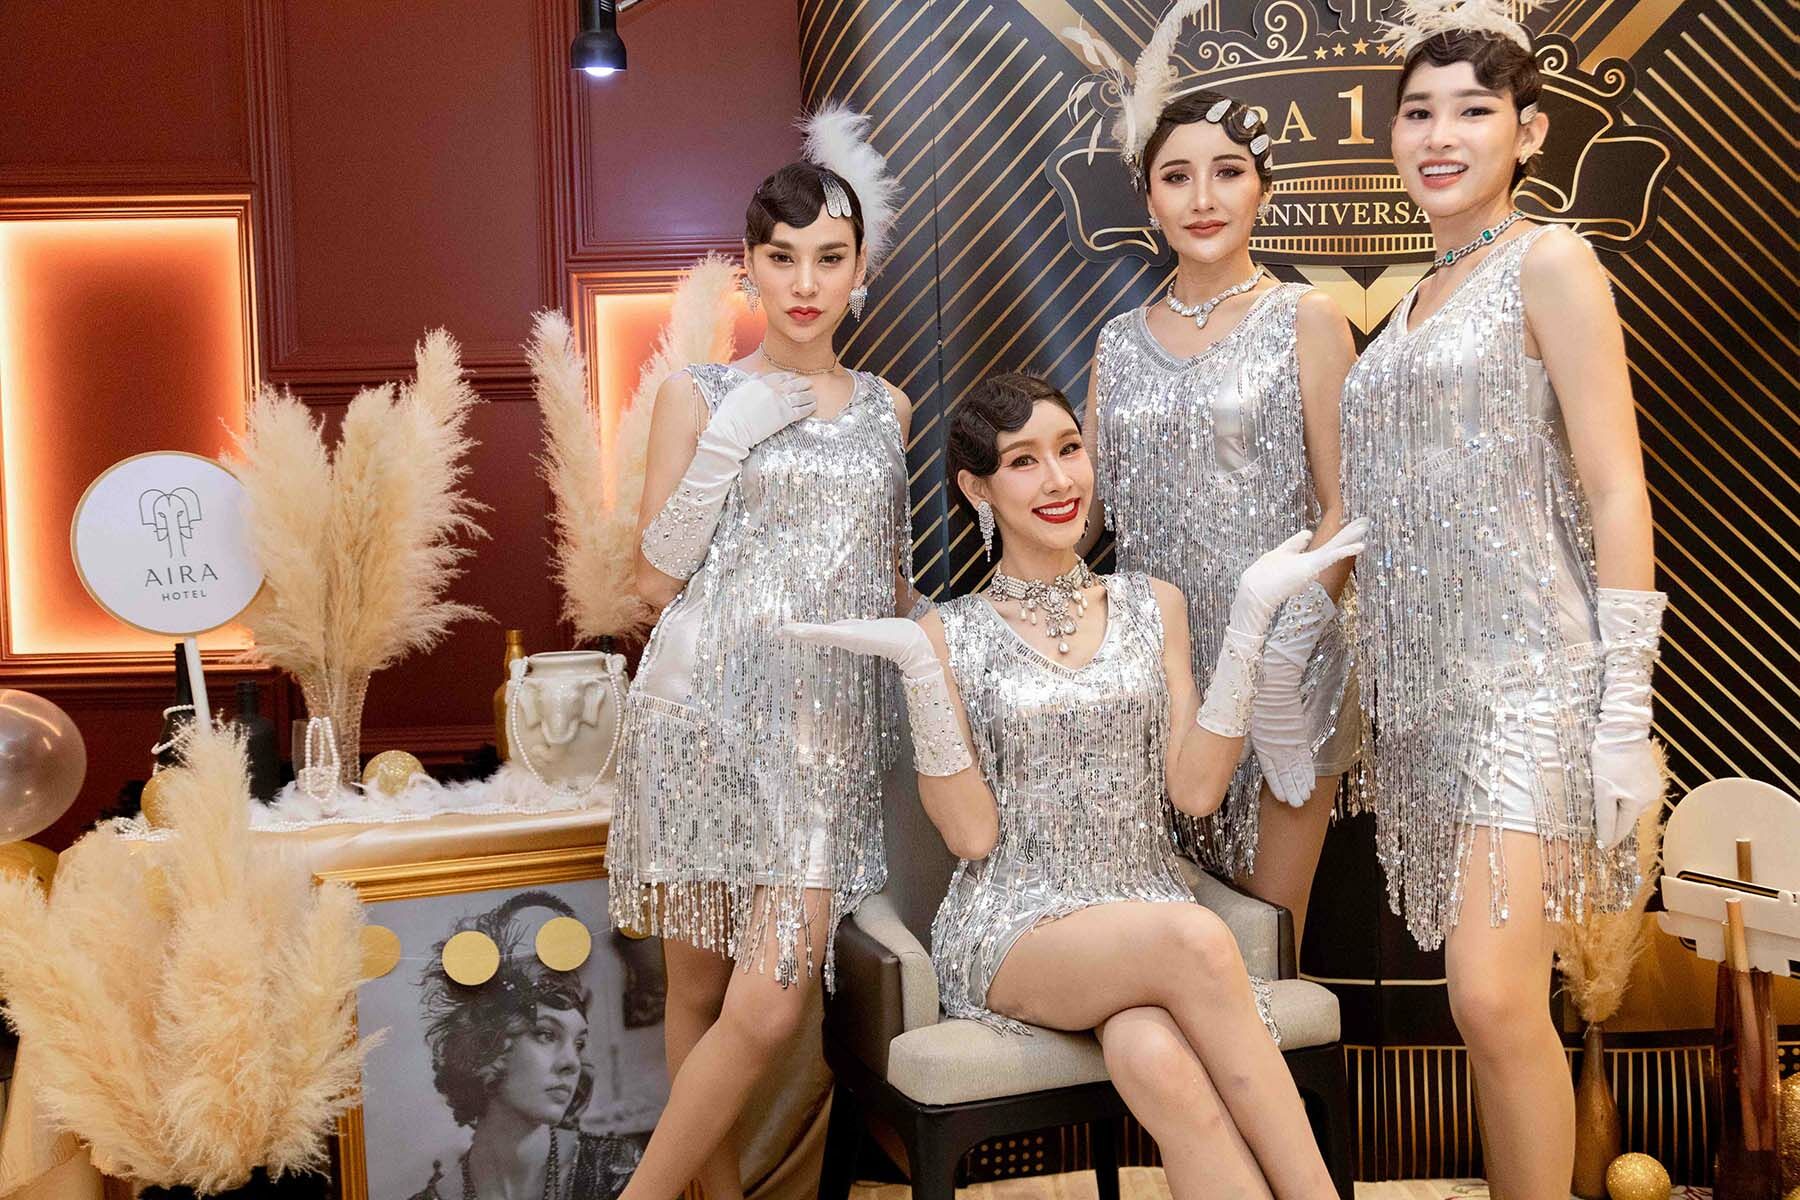 Aira Hotel Bangkok marks first anniversary with grand Gatsby-themed gala | News by Thaiger